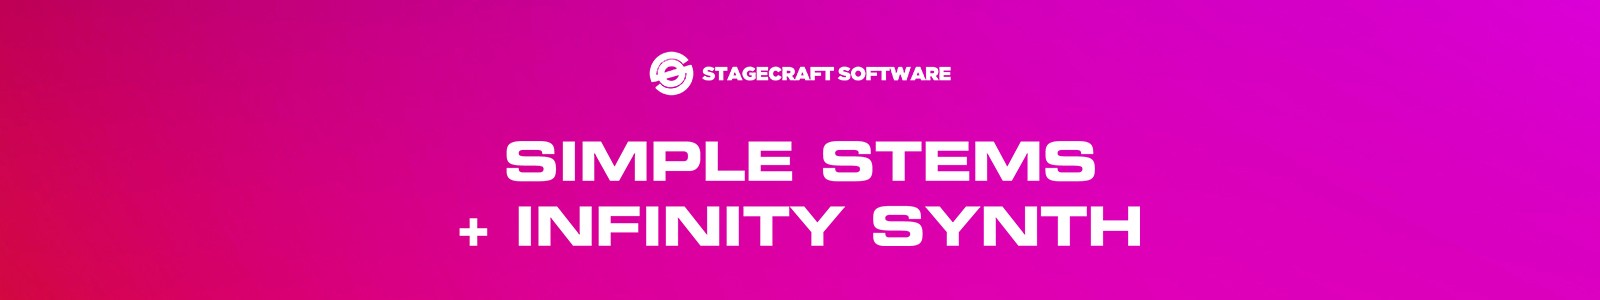 Simple Stems + Infinity Synth by Stagecraft